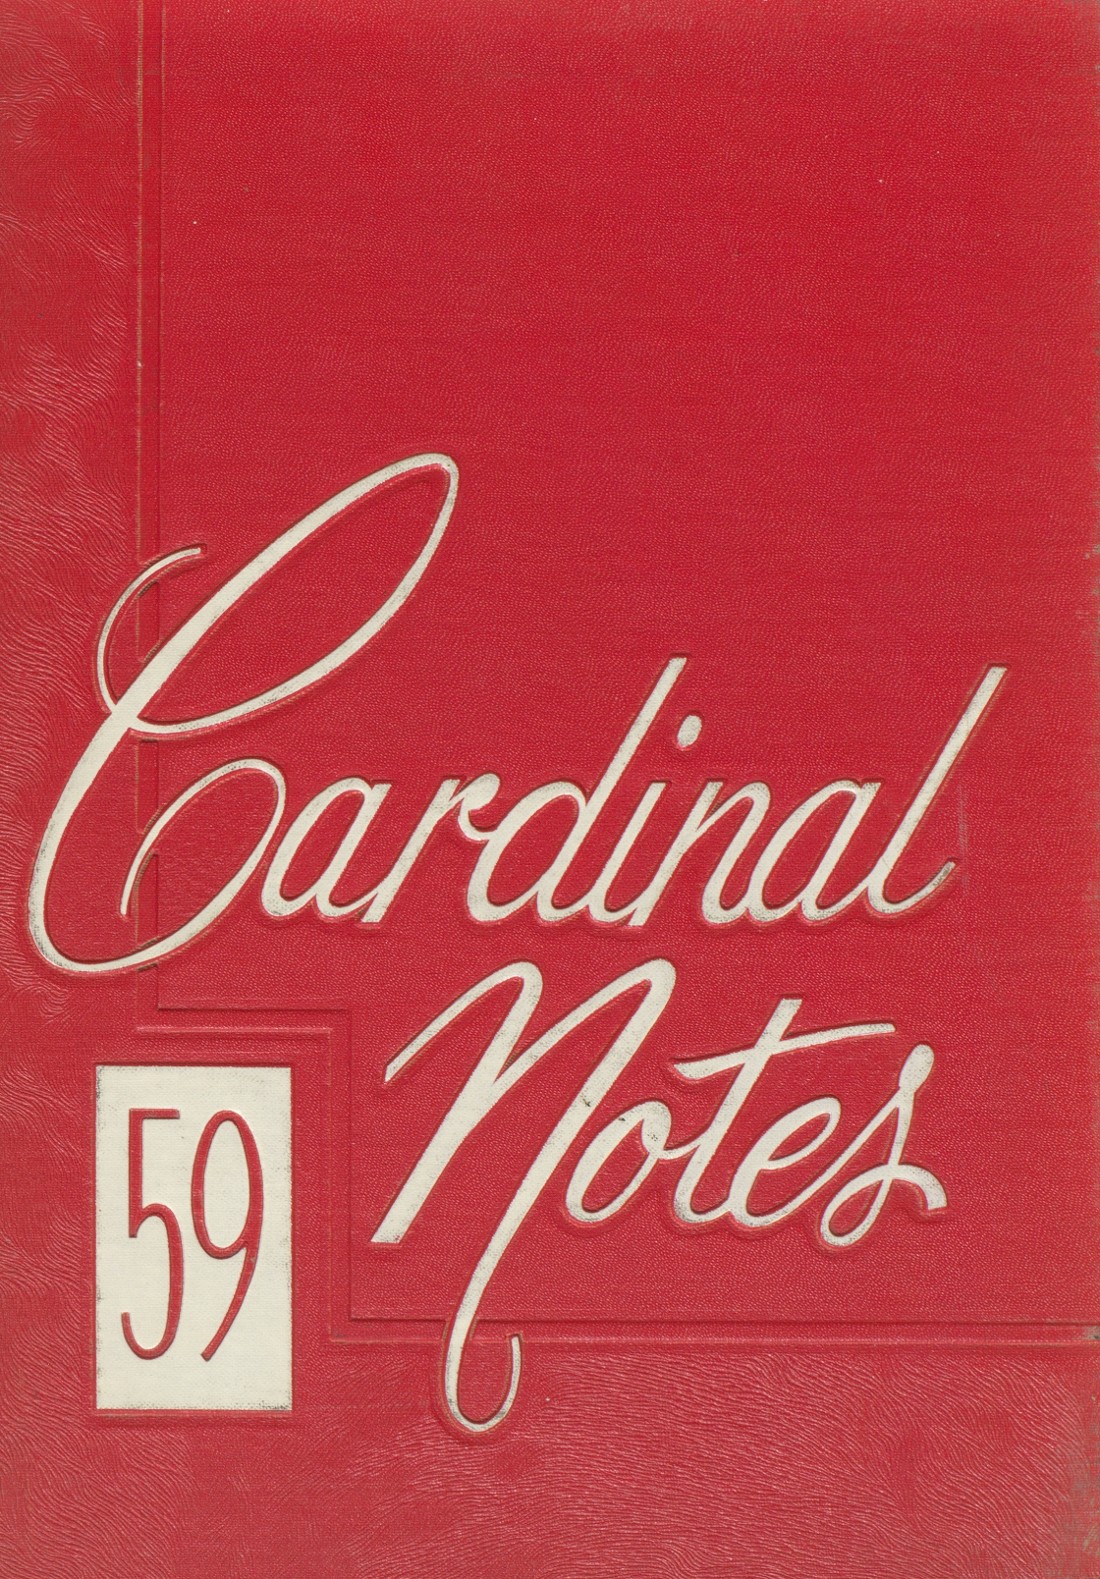 1959 yearbook from Mentor High School from Mentor, Ohio